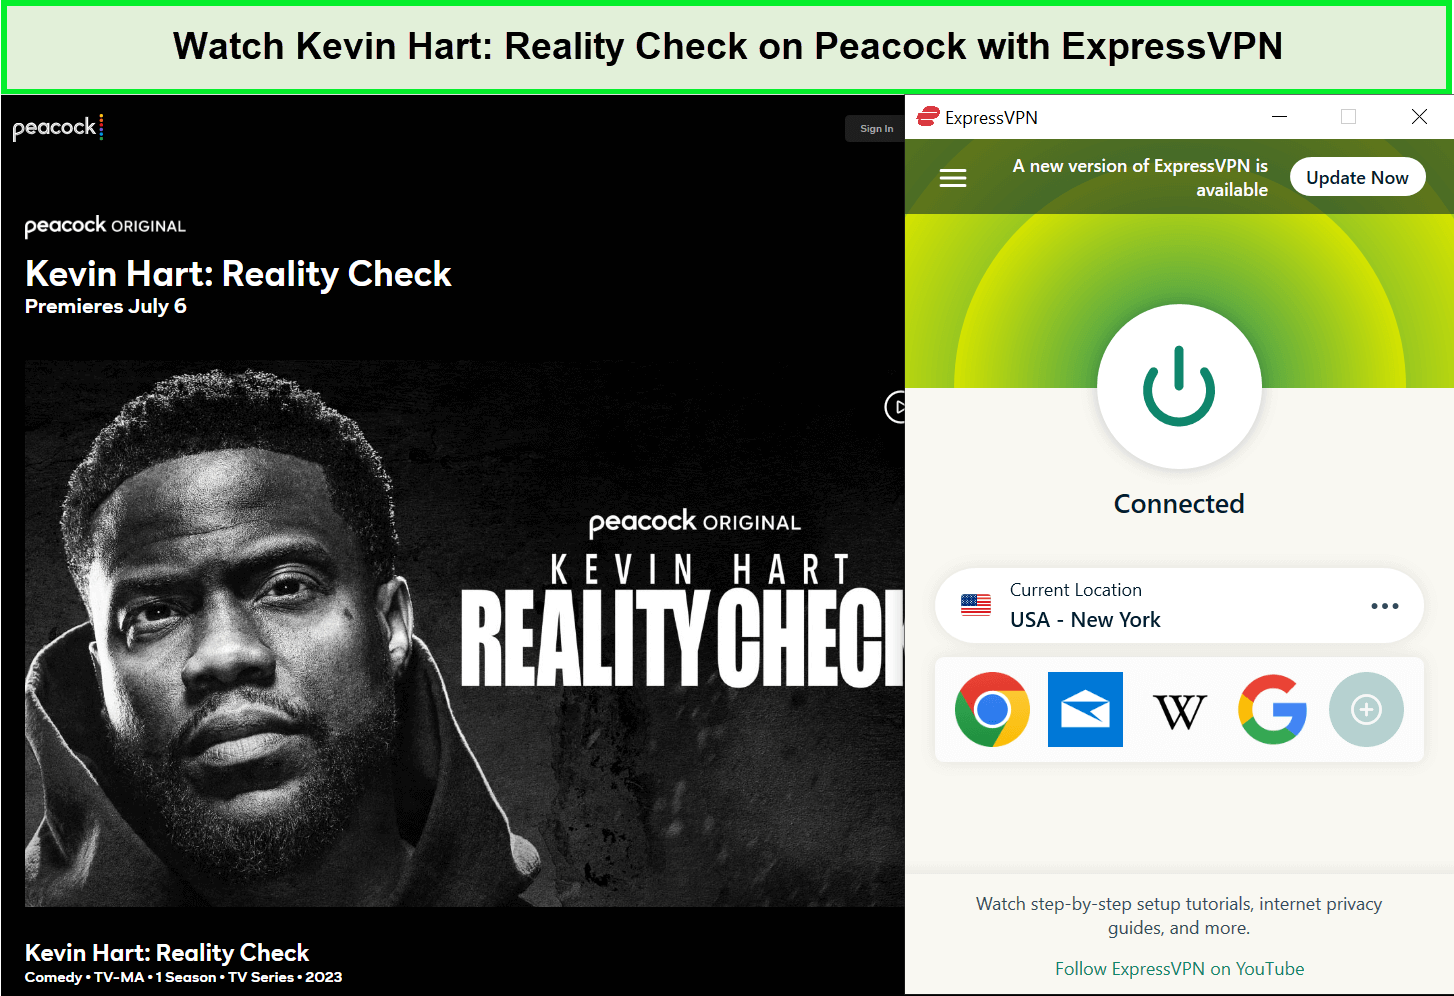 Watch-Kevin-Hart-Reality-Check-in-UAE-on-Peacock-with-ExpressVPN